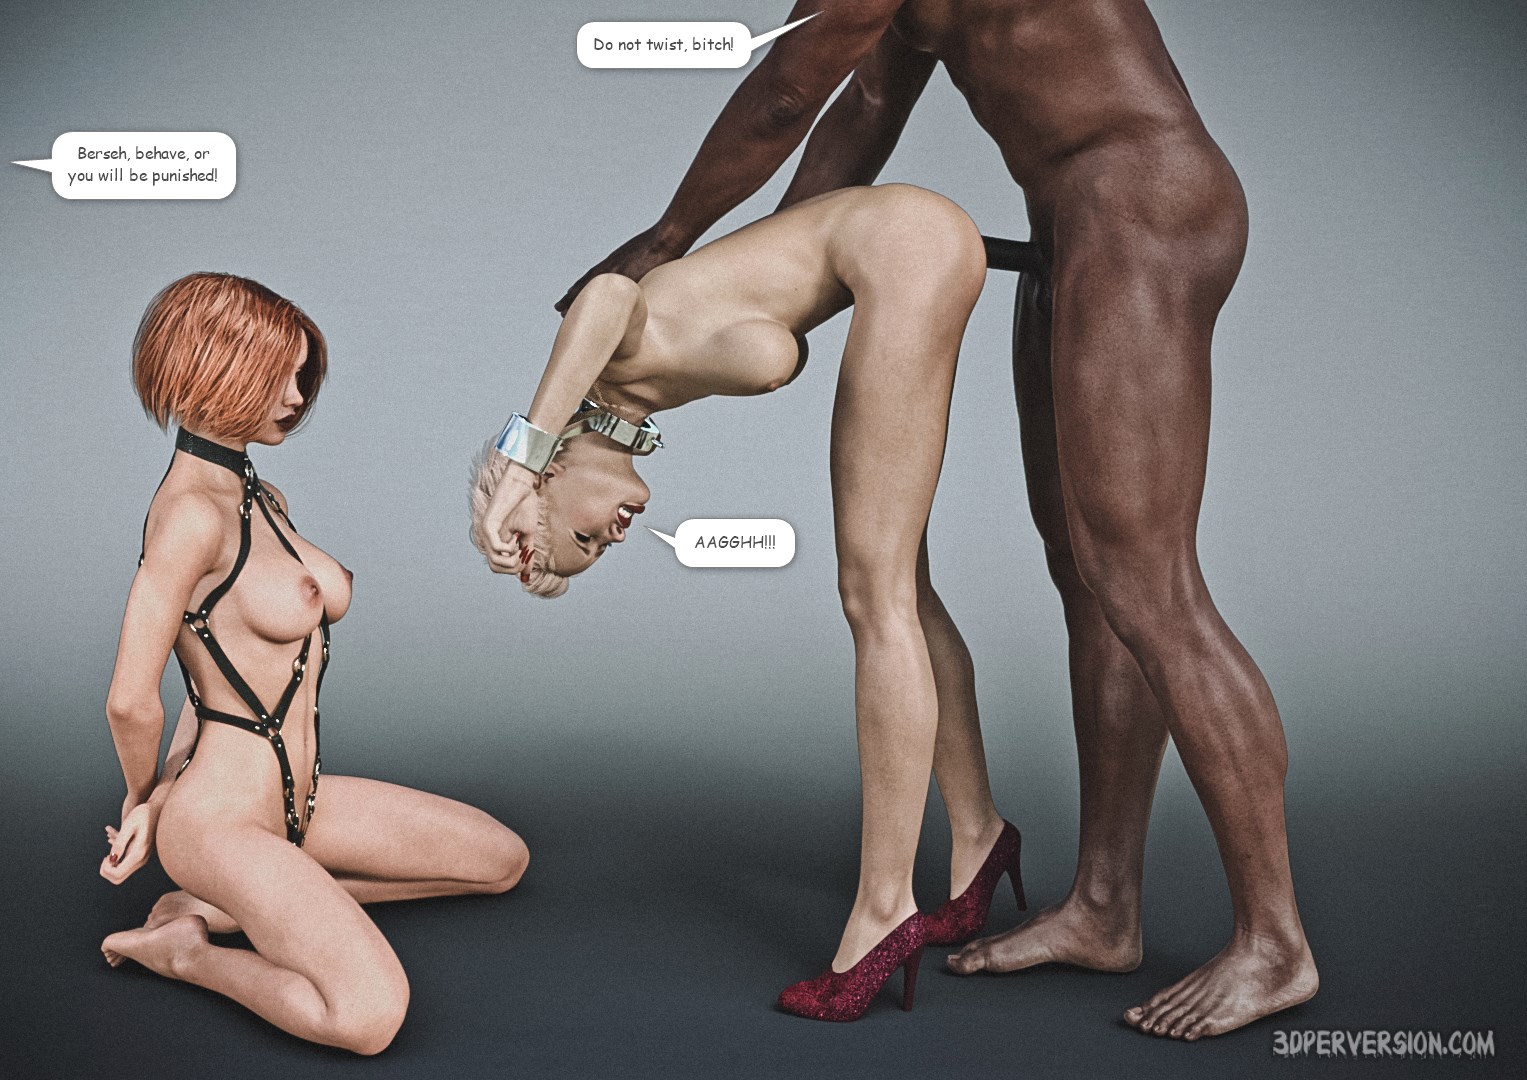 1527px x 1080px - The customer 10 - 3D Perversion